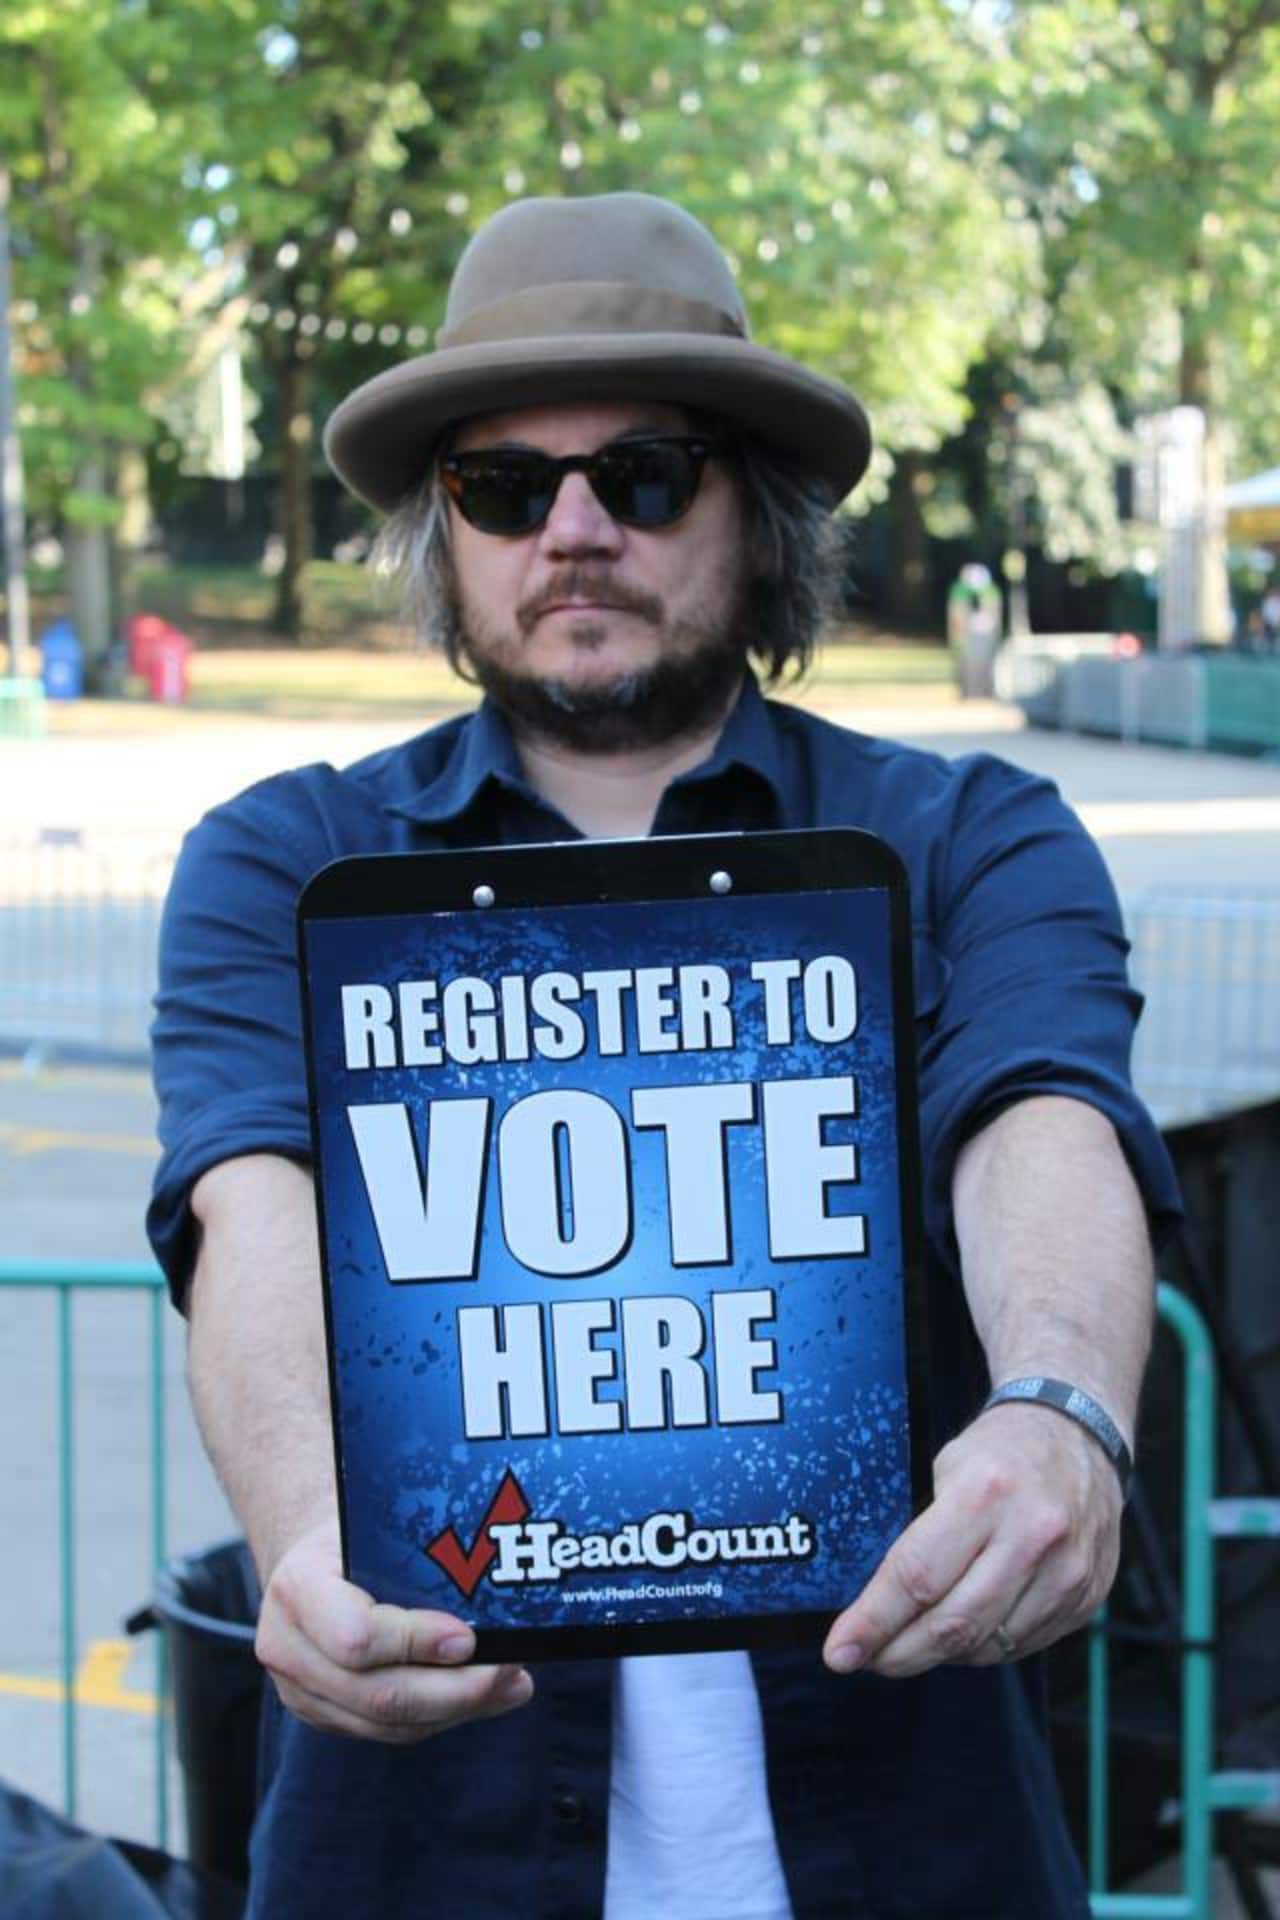 Capitol Theatre, Wilco and Ticketfly are teaming up to donate a portion of ticket proceeds to the #Go Vote campaign.